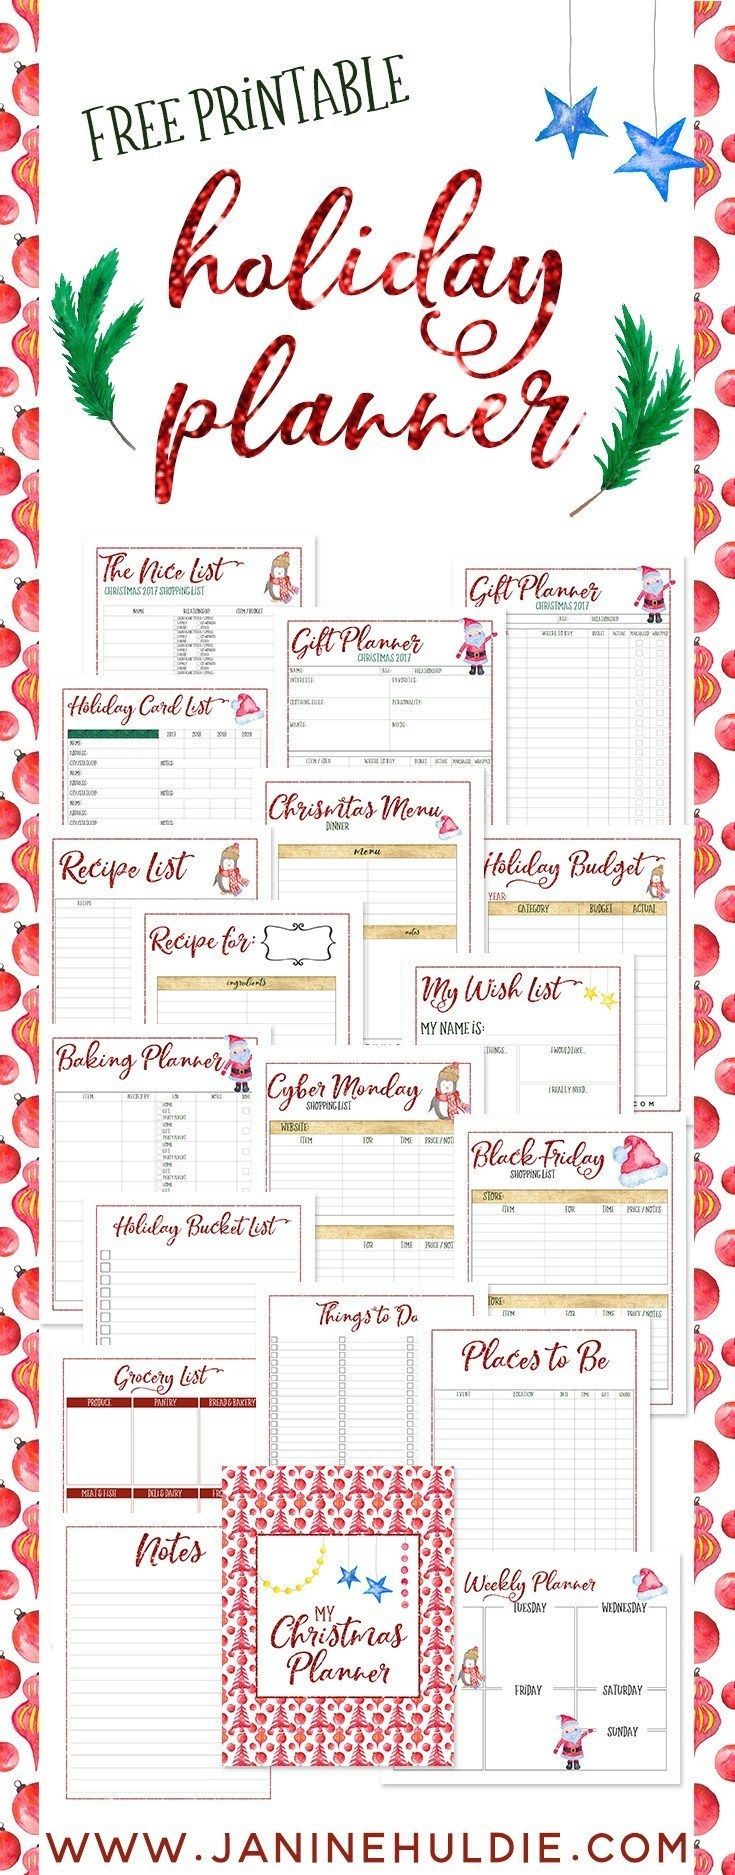 FREE Christmas Planner Printable Available NOW! -   18 holiday Happy free printable ideas